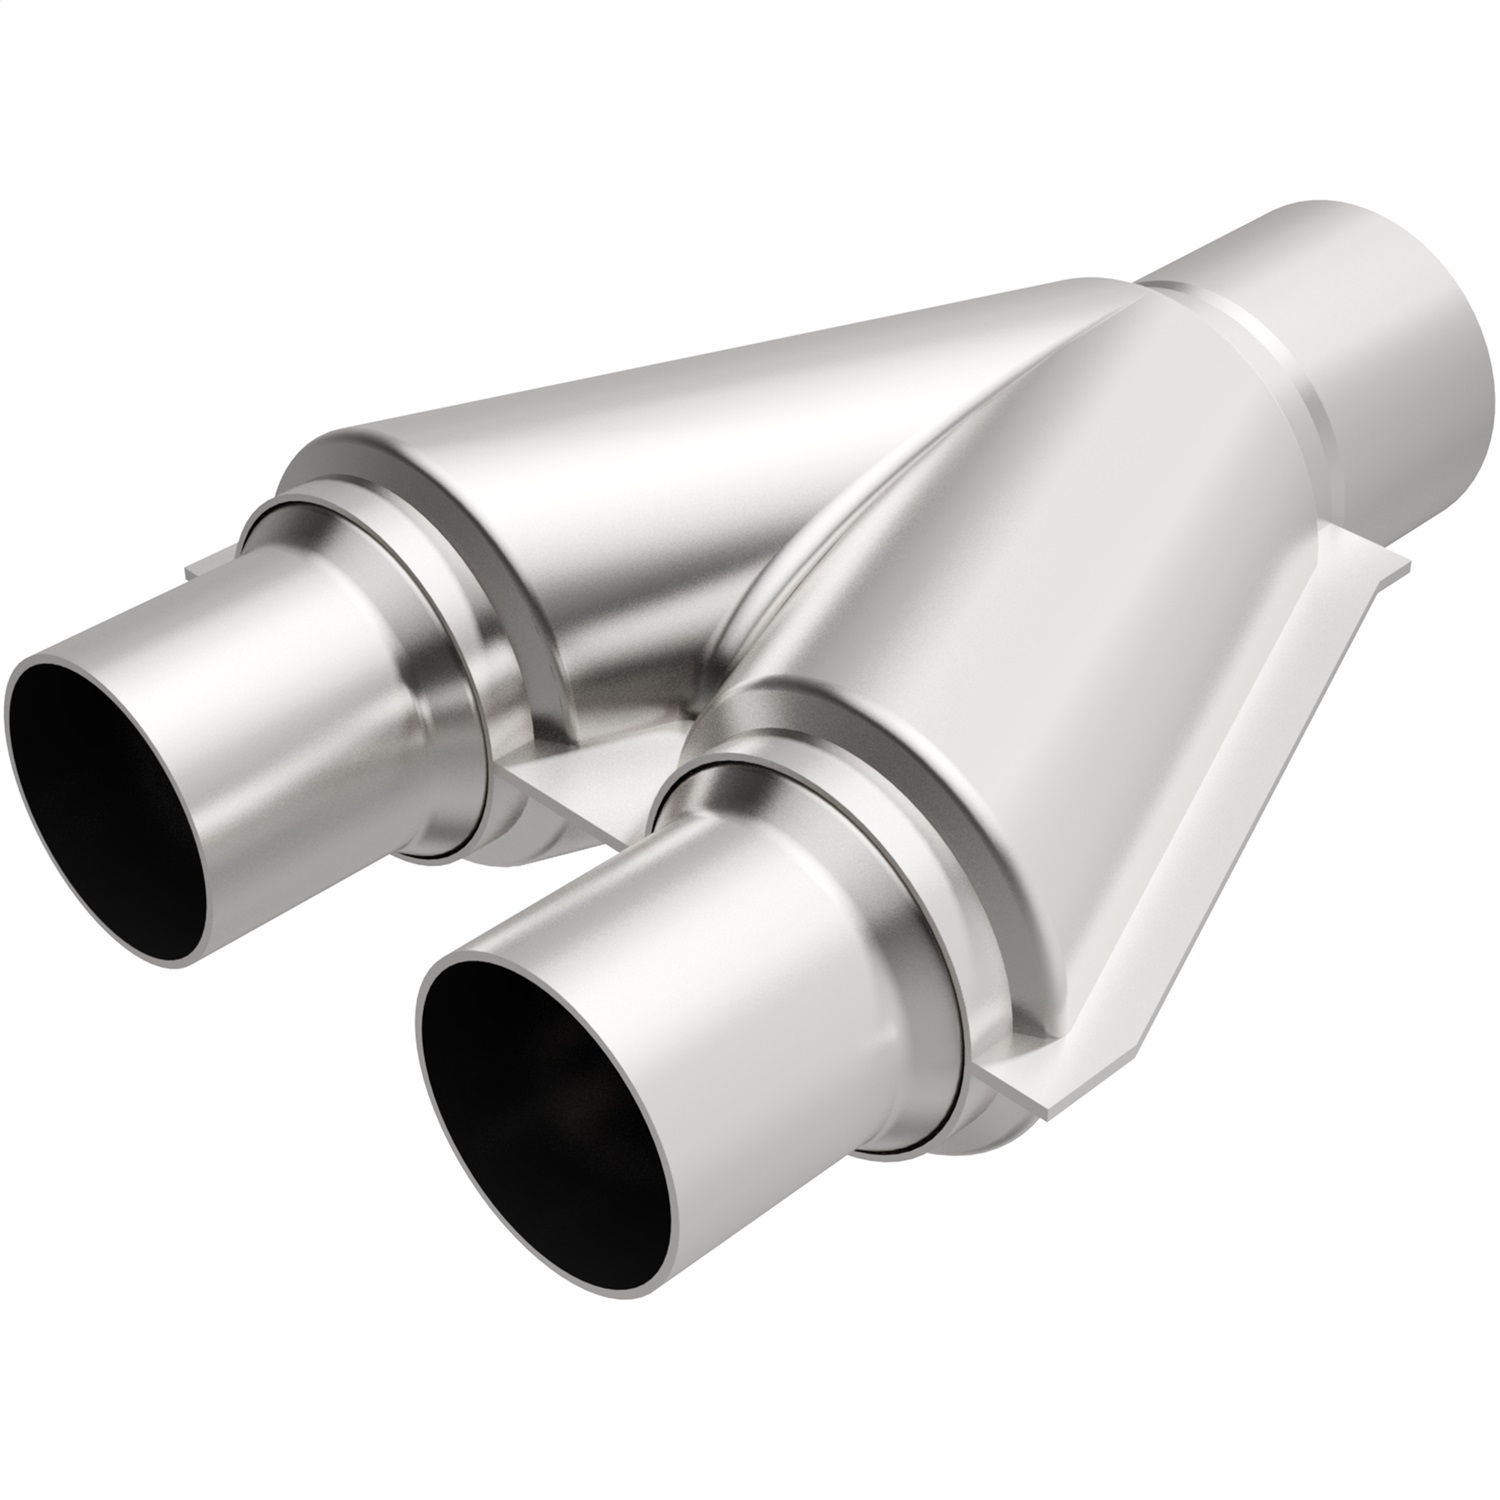 Magnaflow Performance Exhaust Magnaflow Performance Exhaust 10758 Stainless Steel Y-Pipe